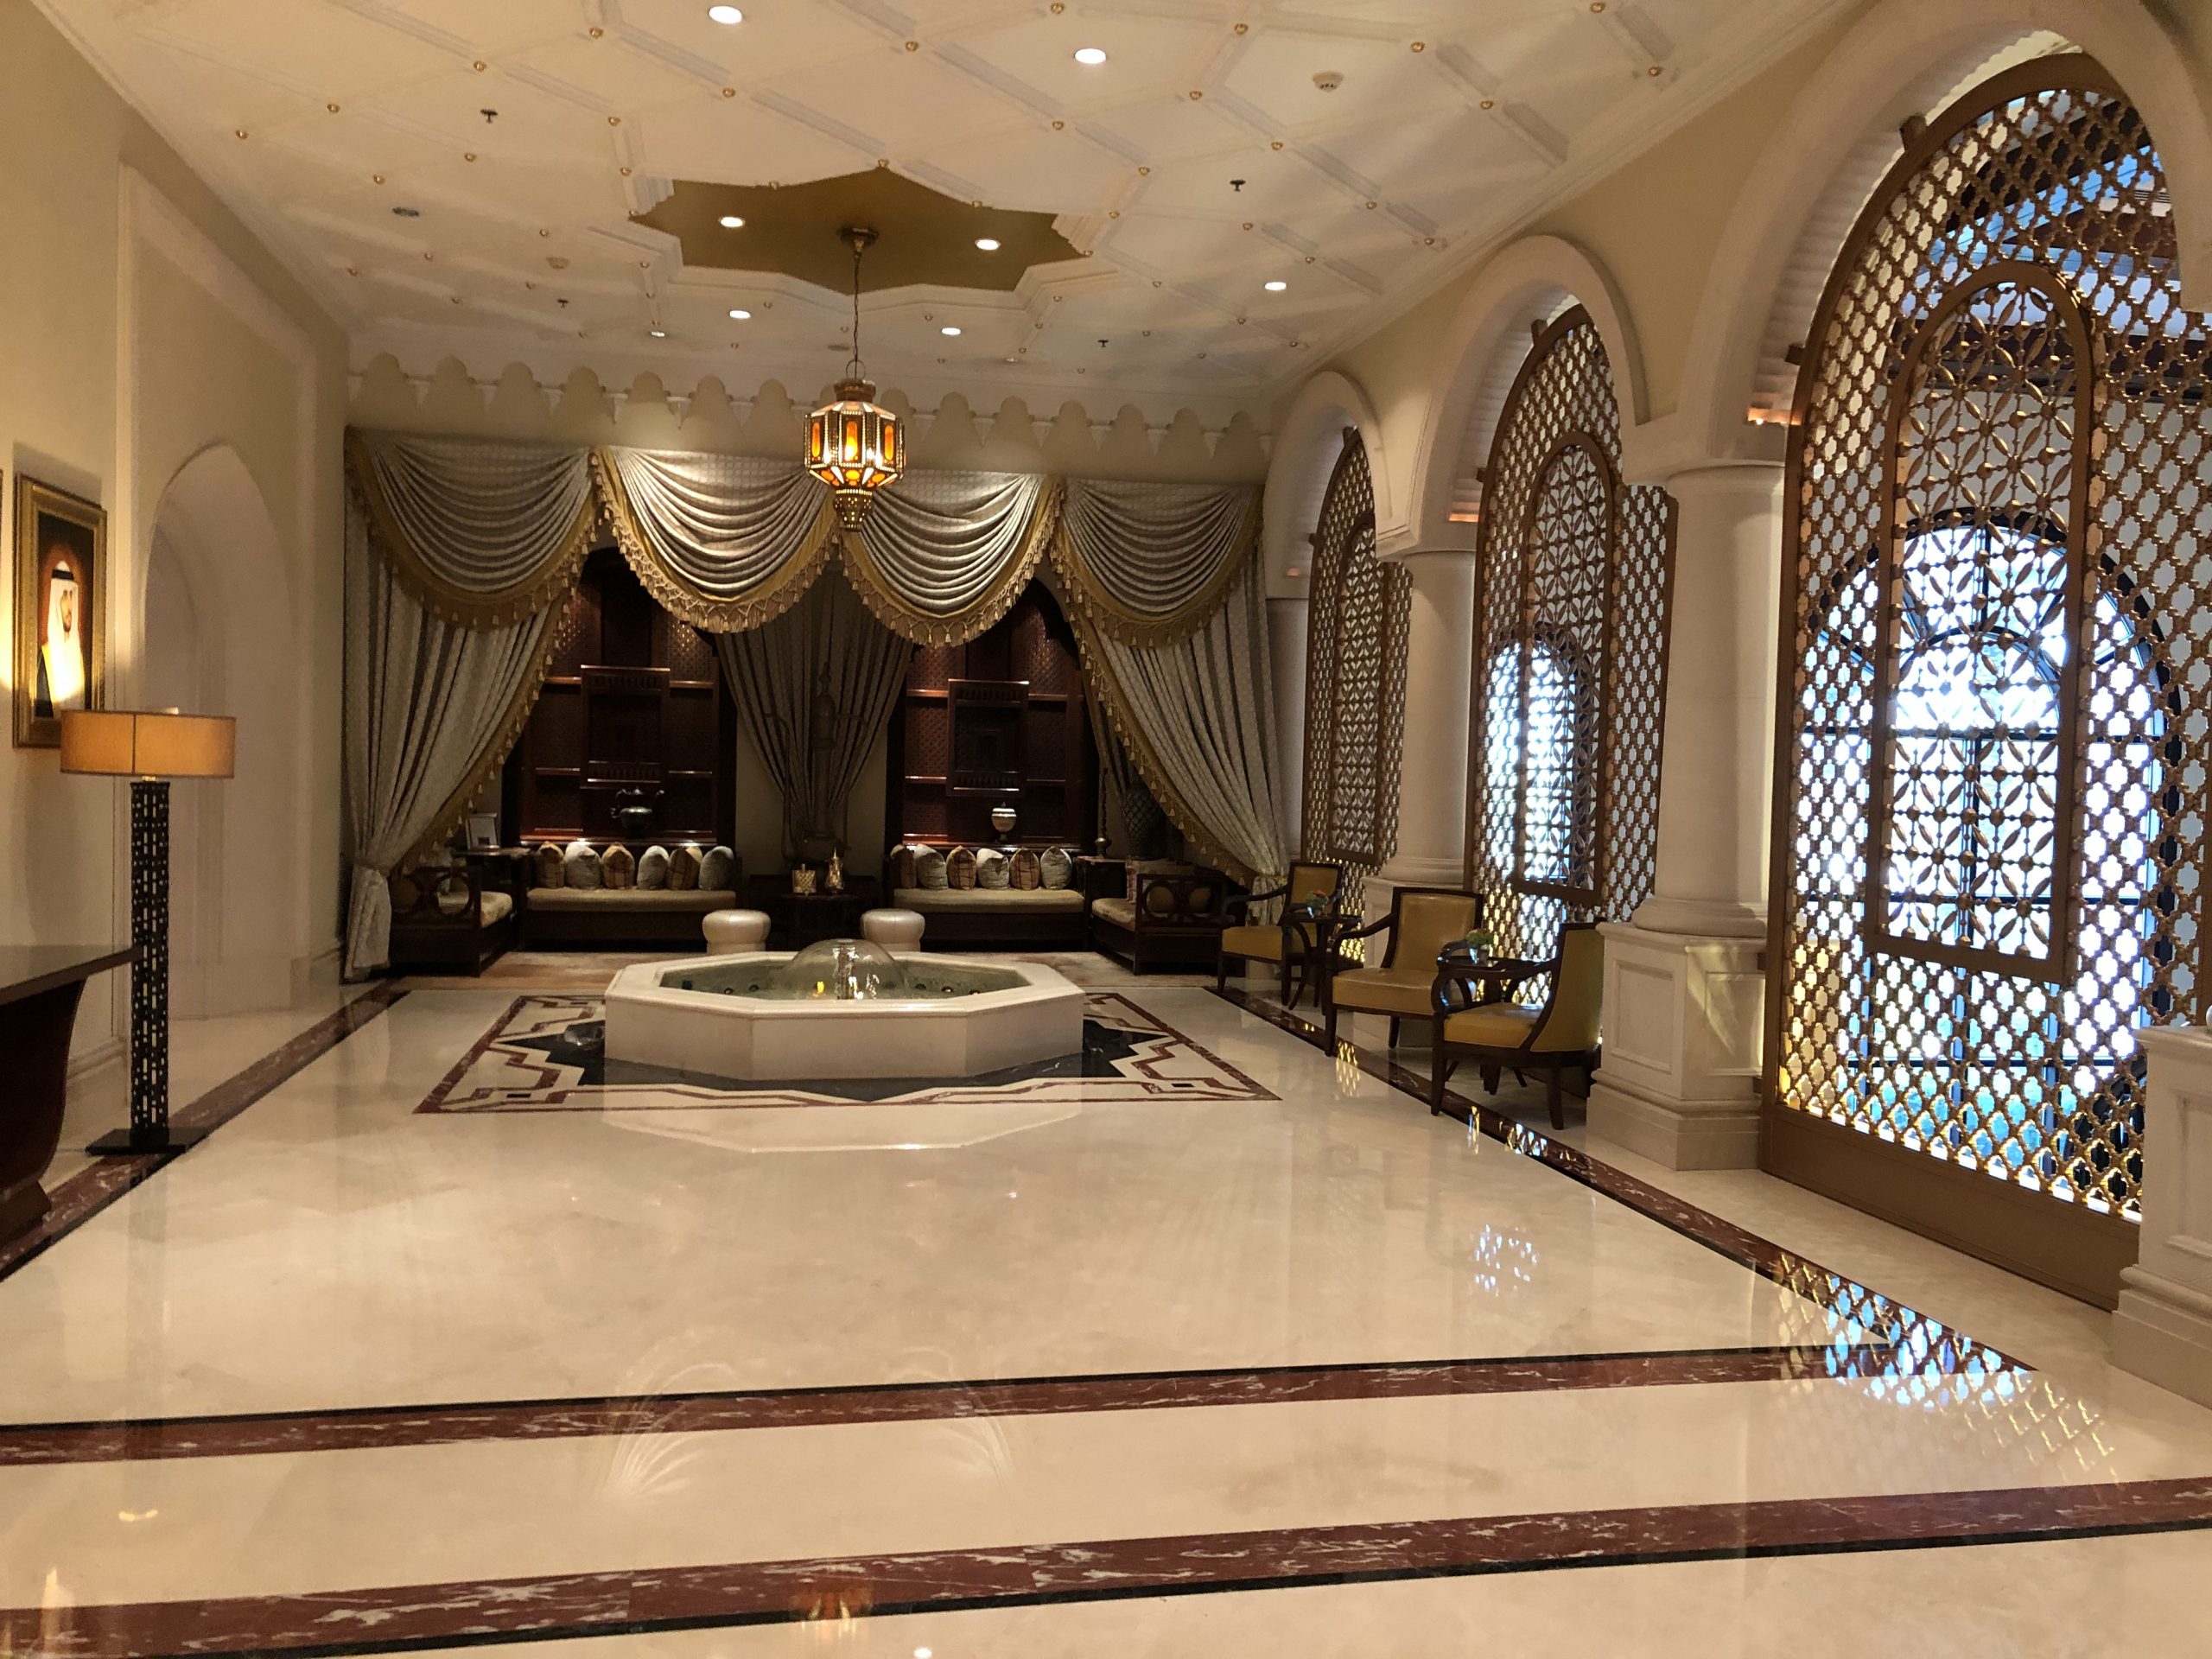 You are currently viewing Ritz Carlton Dubai- Review of Room and Hotel Grounds